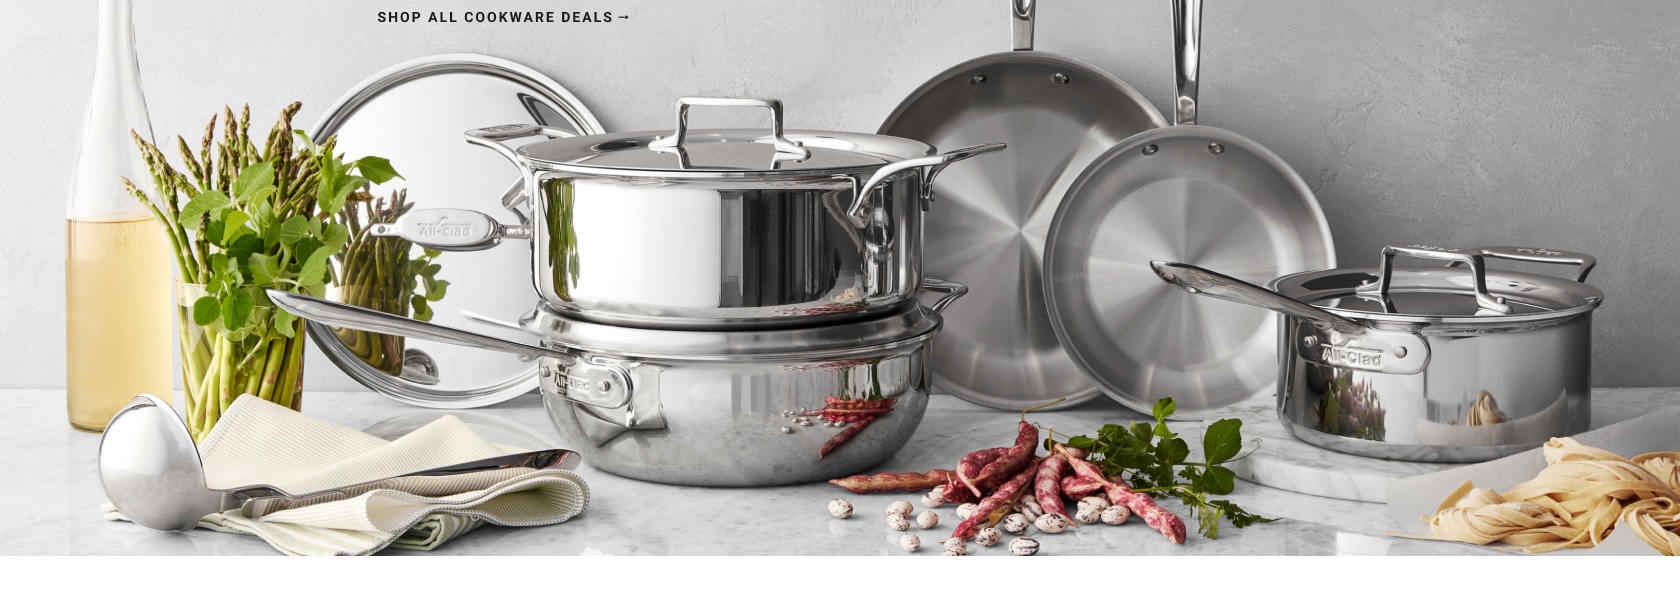 Up to 35% Off Cookware*